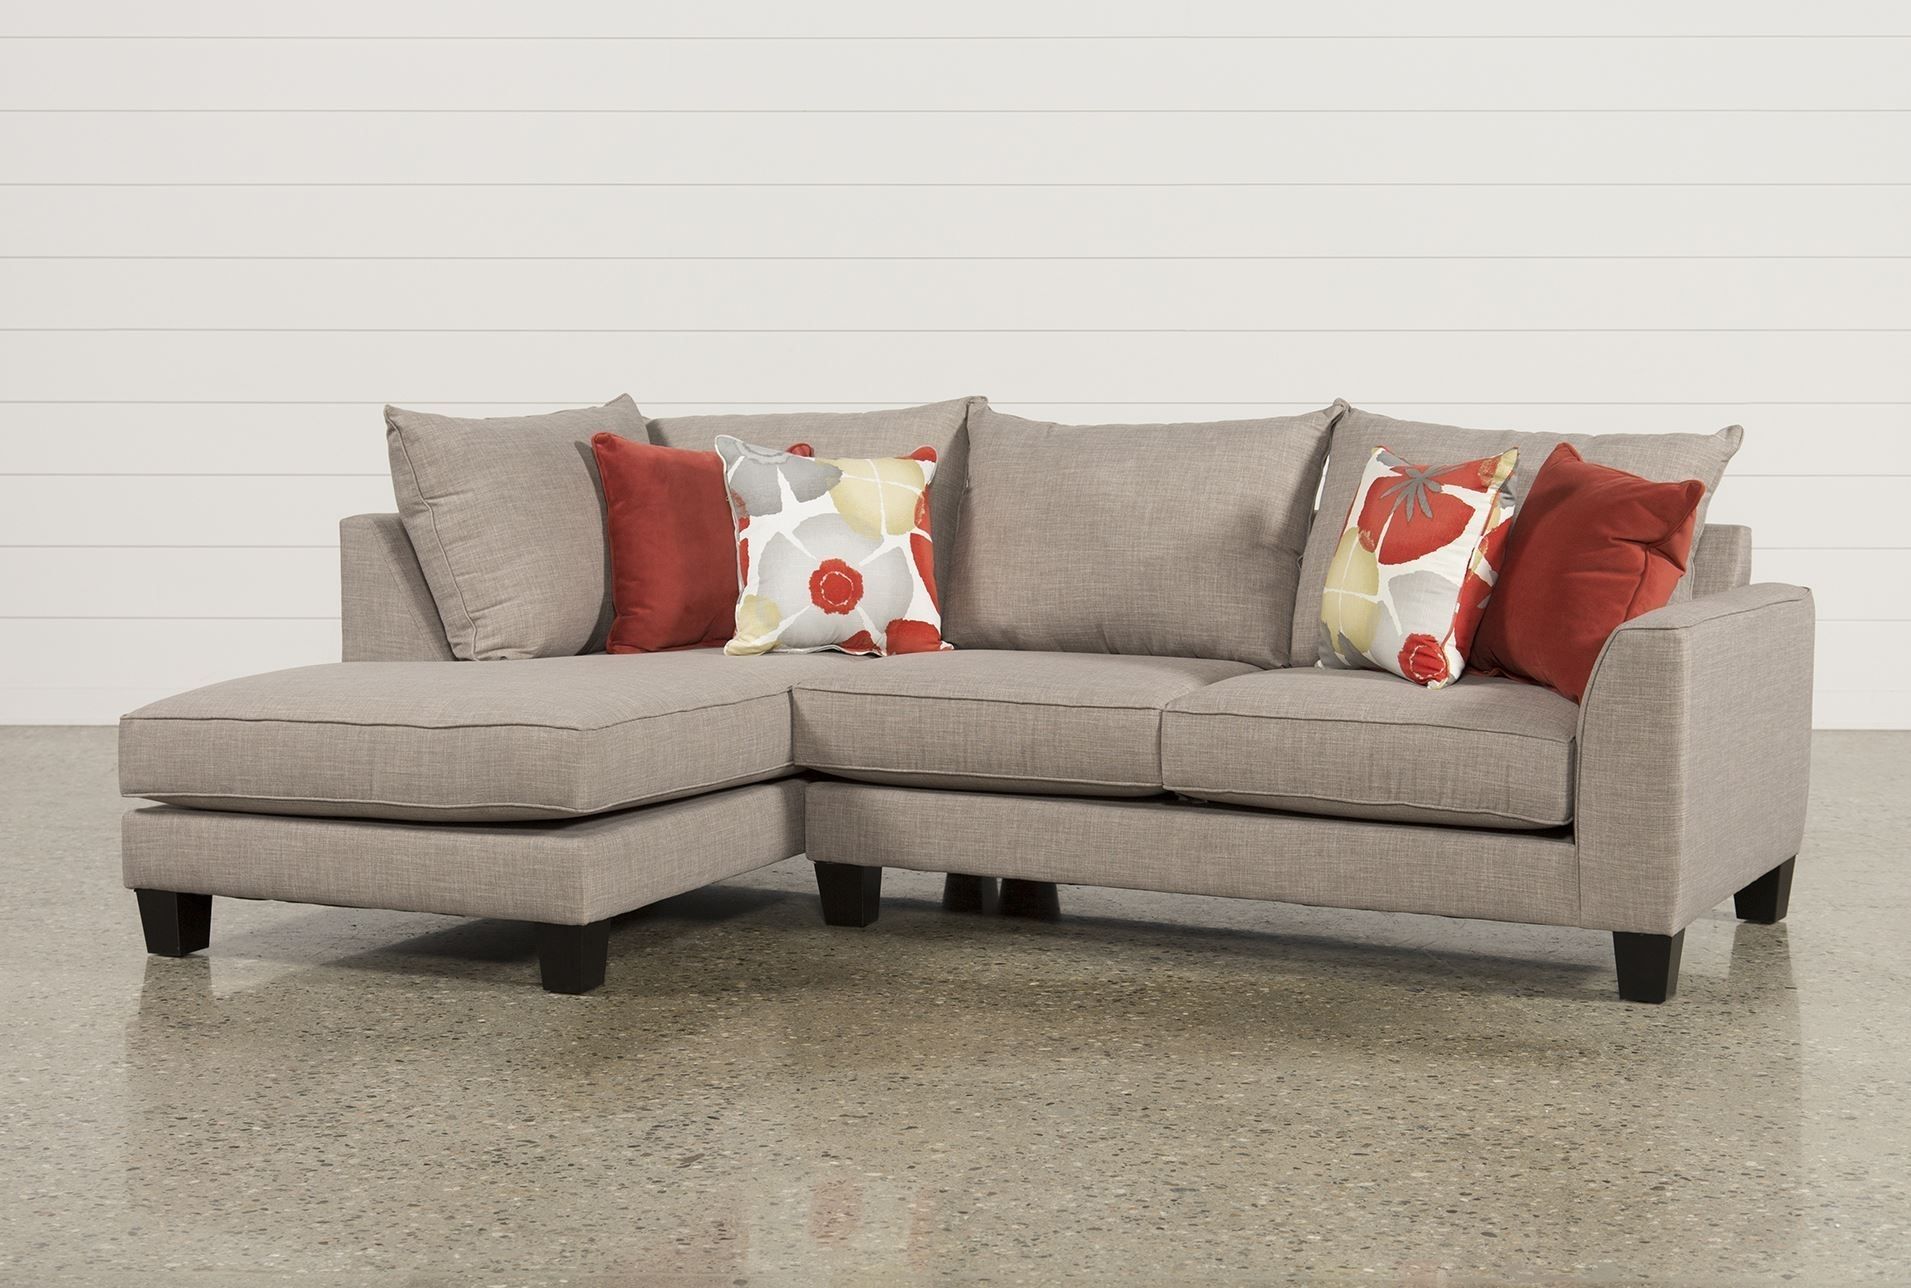 Bunch Ideas Of 2 Piece Chaise Sectional With Additional Kira 2 Piece Intended For Delano 2 Piece Sectionals With Laf Oversized Chaise (View 12 of 30)